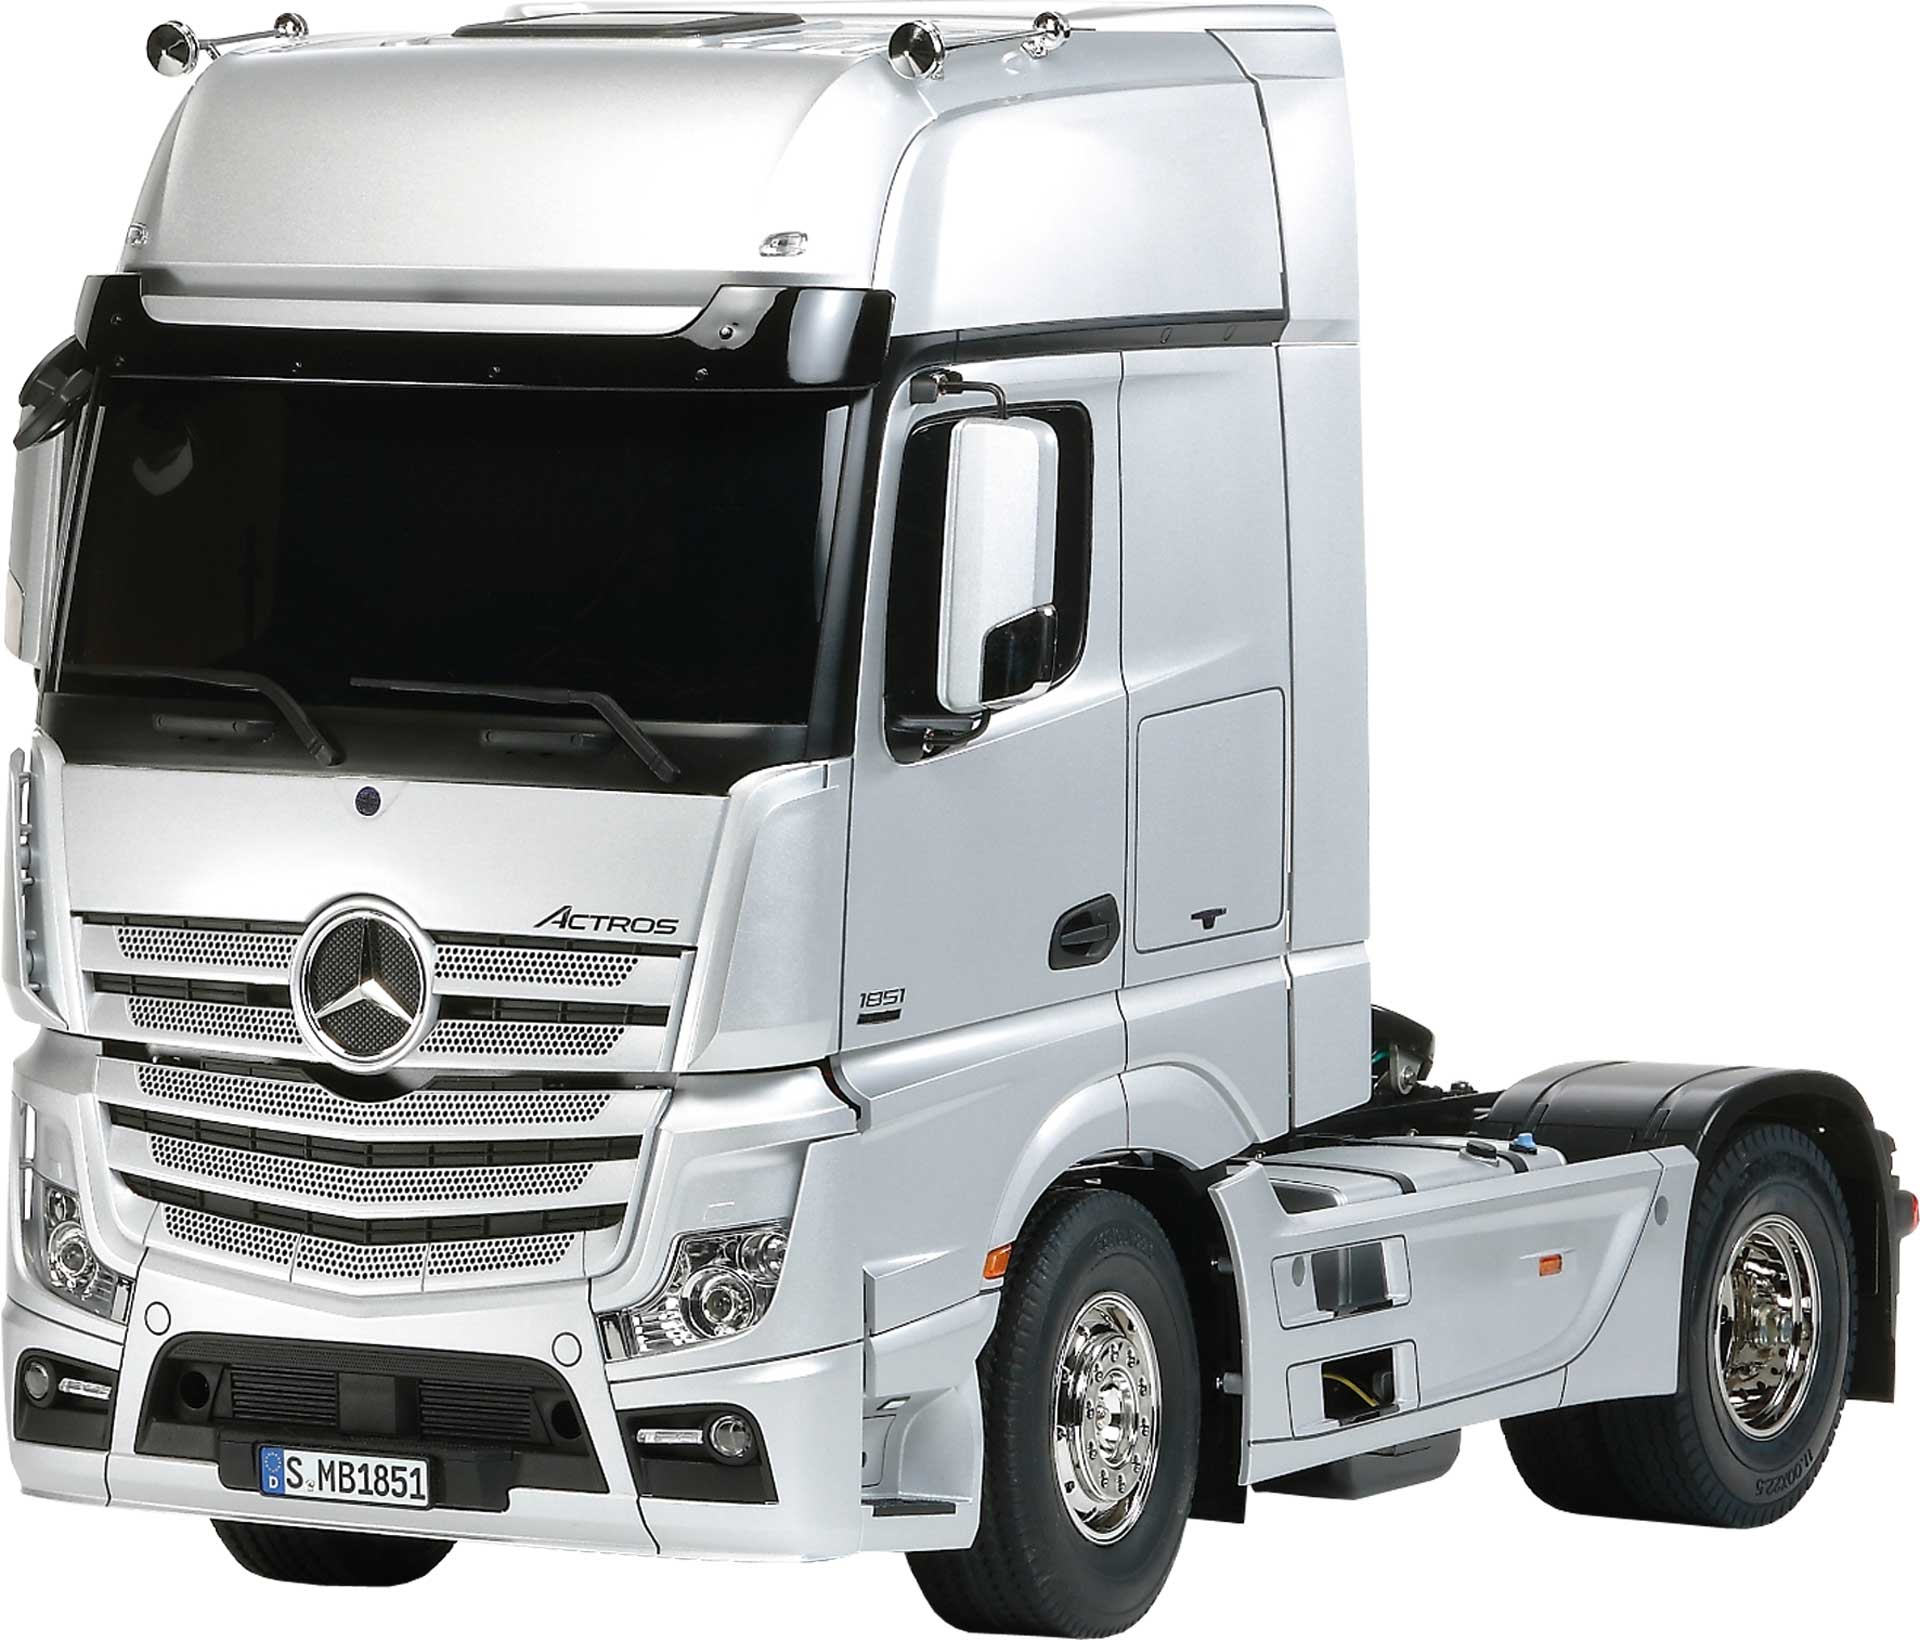 TAMIYA MERCEDES-BENZ ACTROS 1851 GIGASPACE 1:14 CAMION RC